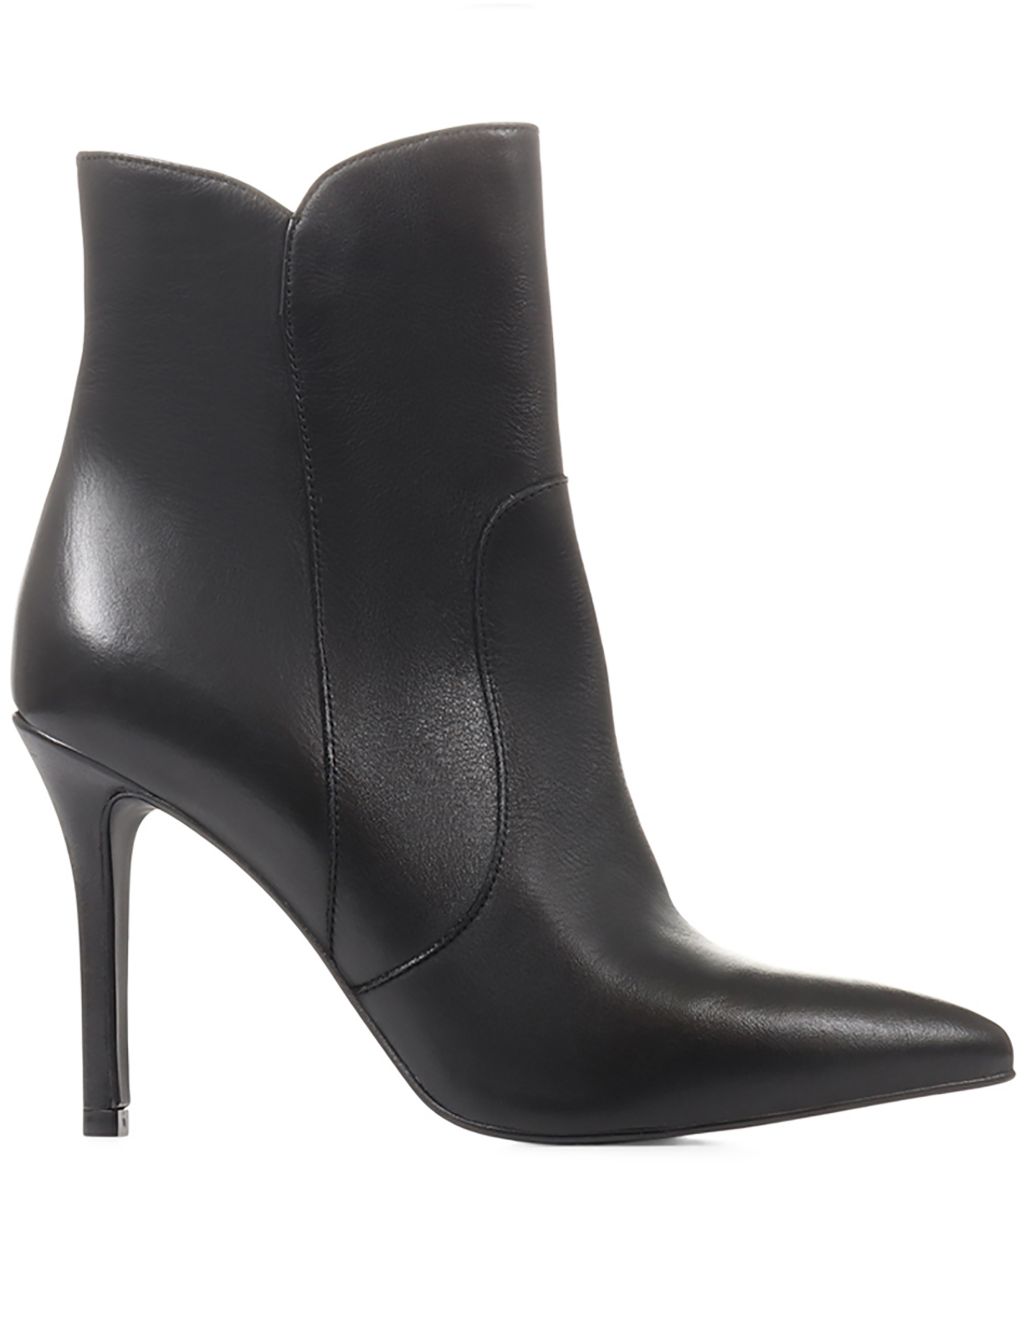 Leather Stiletto Heel Ankle Boots image 2